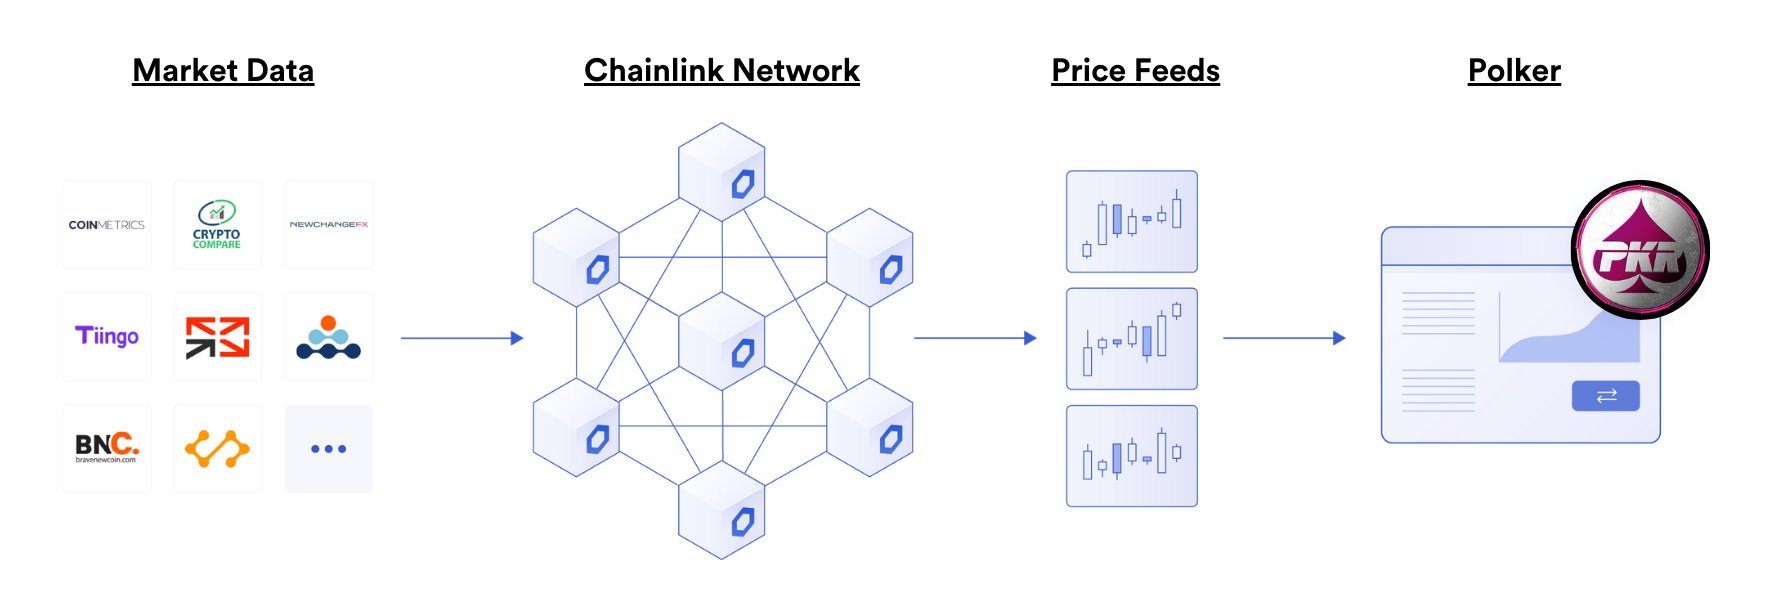 Polker Is Integrating Chainlink Price Feeds Into Its Multi-Crypto Marketplace – Sponsored Bitcoin News